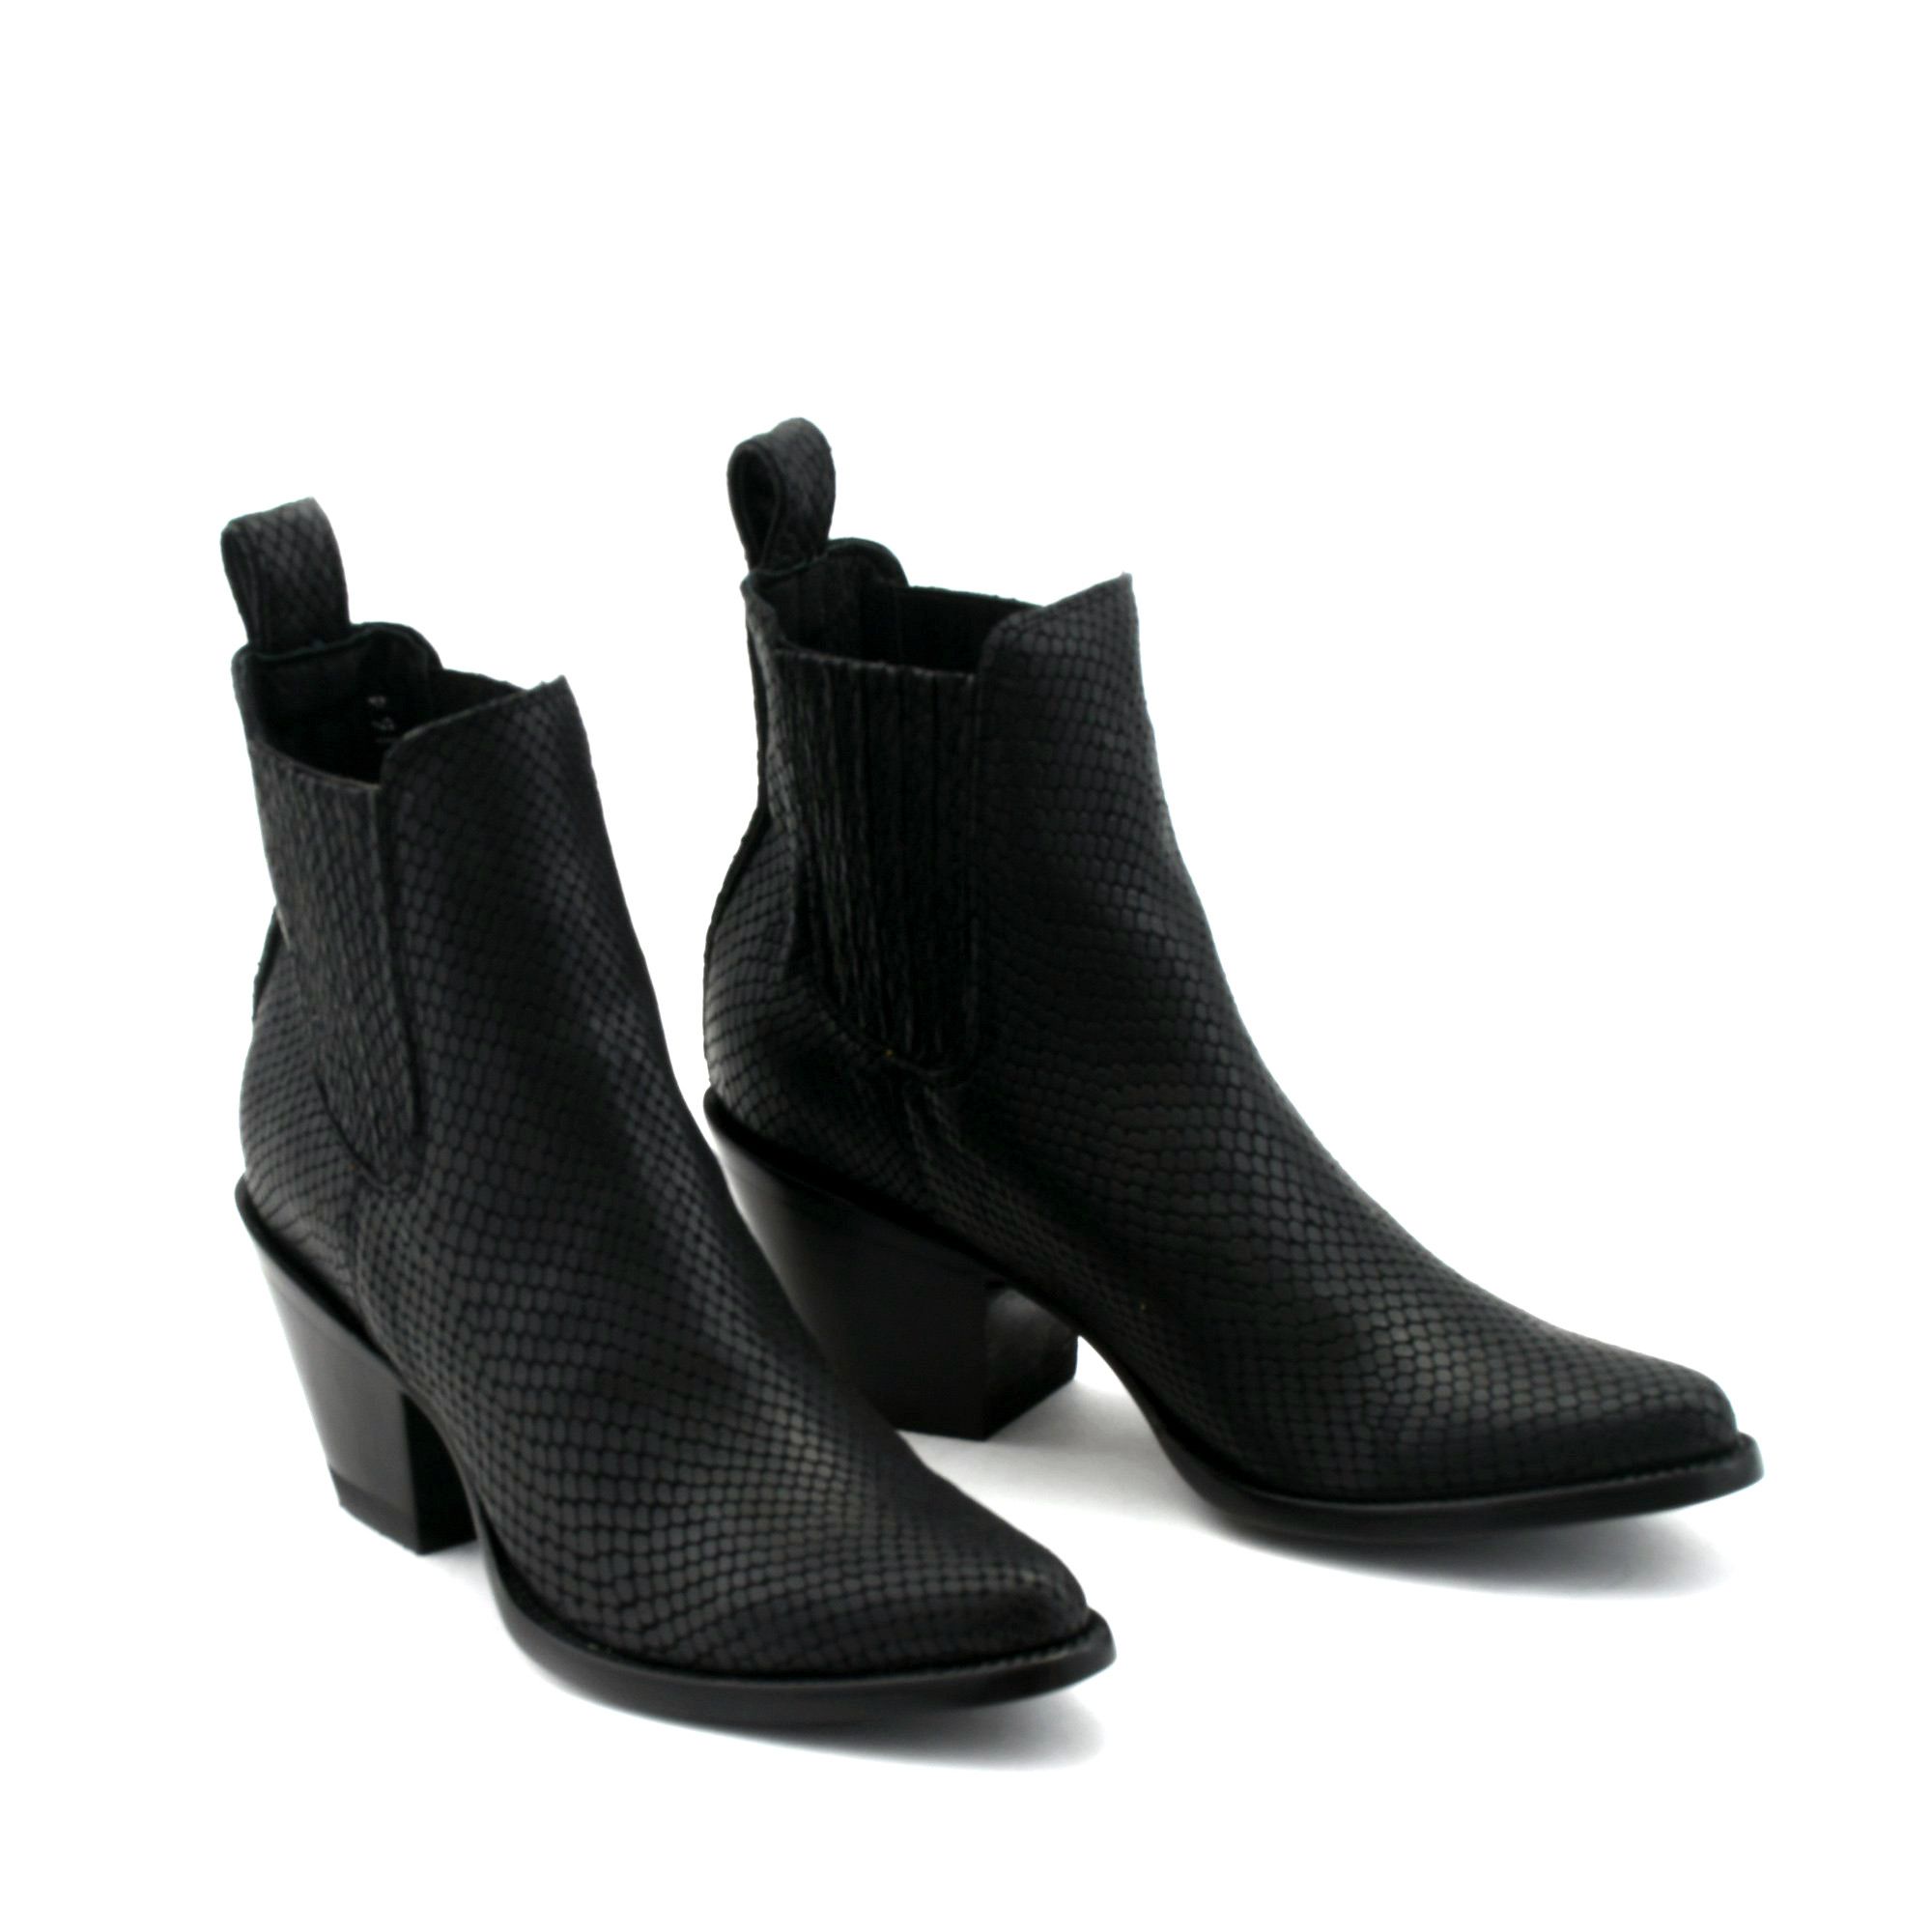 ESTUDIO BLACK SNAKE POINTED TOE ANKLE BOOTS, LEATHER EMBOSSED SNAKE    ELASTICIZED SIDES COVERED   Total heel height 2.6 Inches 